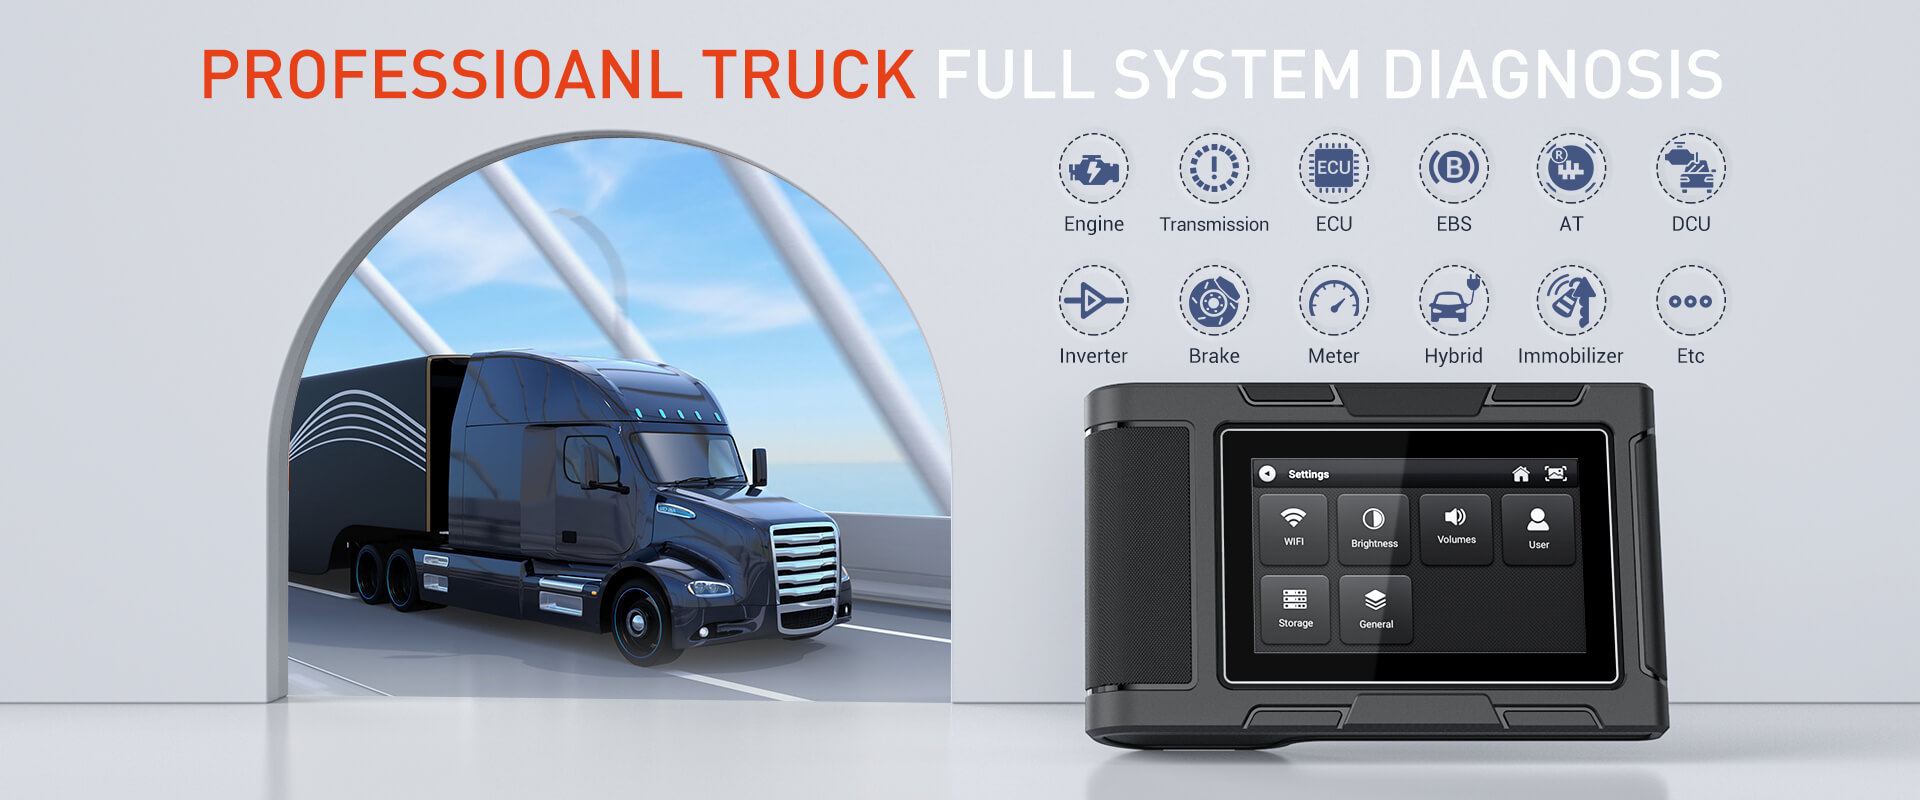 Professional Truck Full System Diagnosis